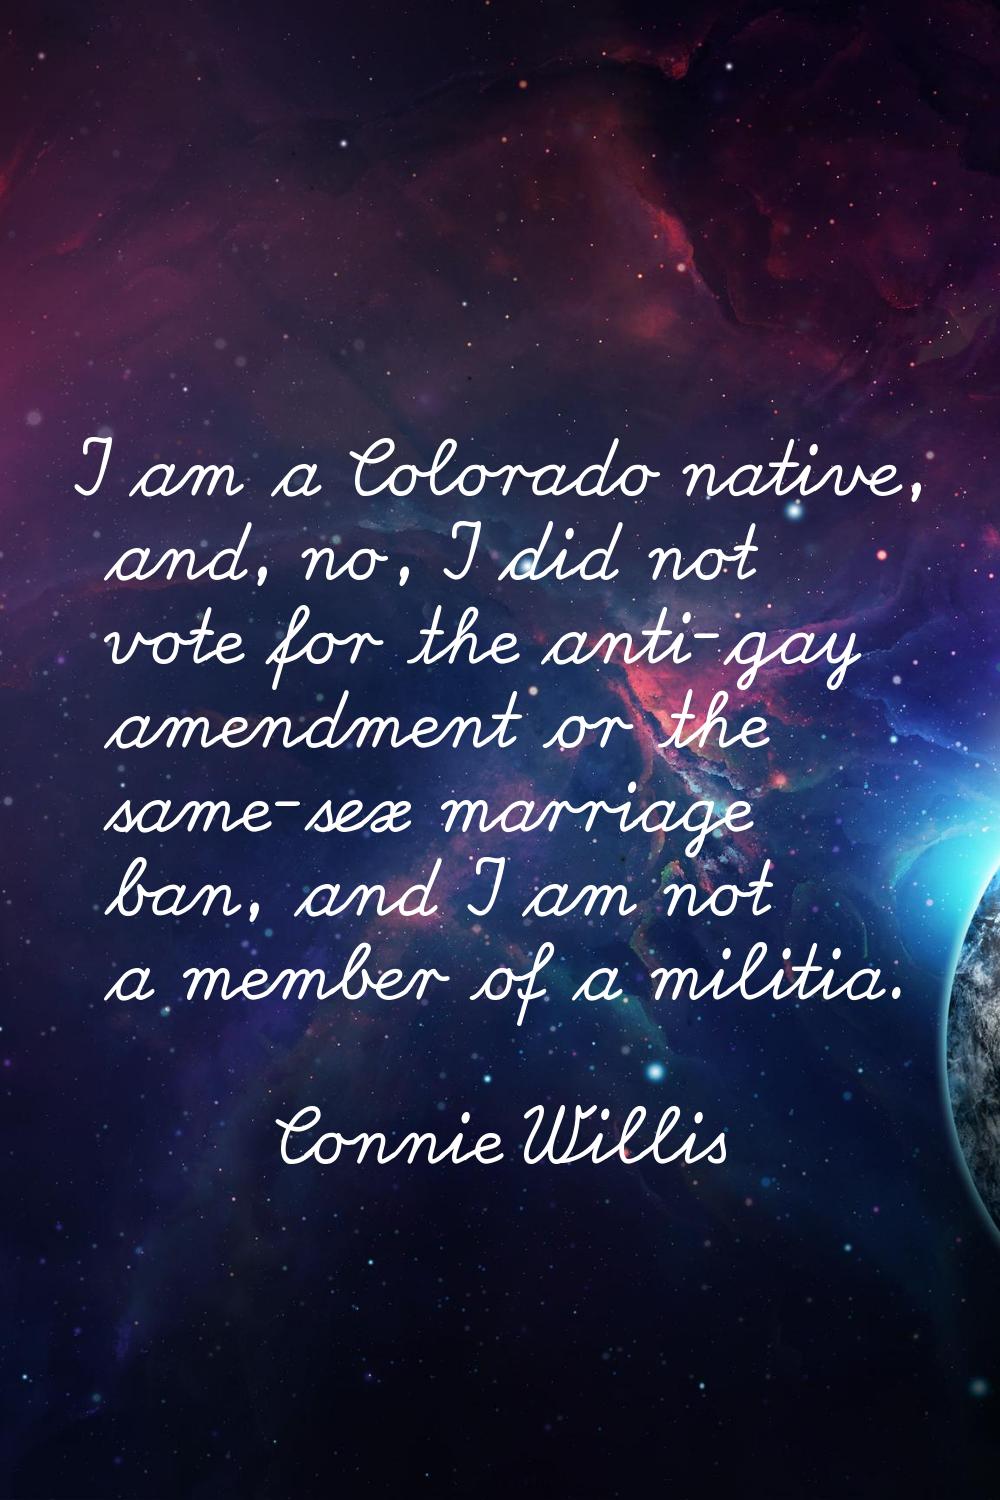 I am a Colorado native, and, no, I did not vote for the anti-gay amendment or the same-sex marriage